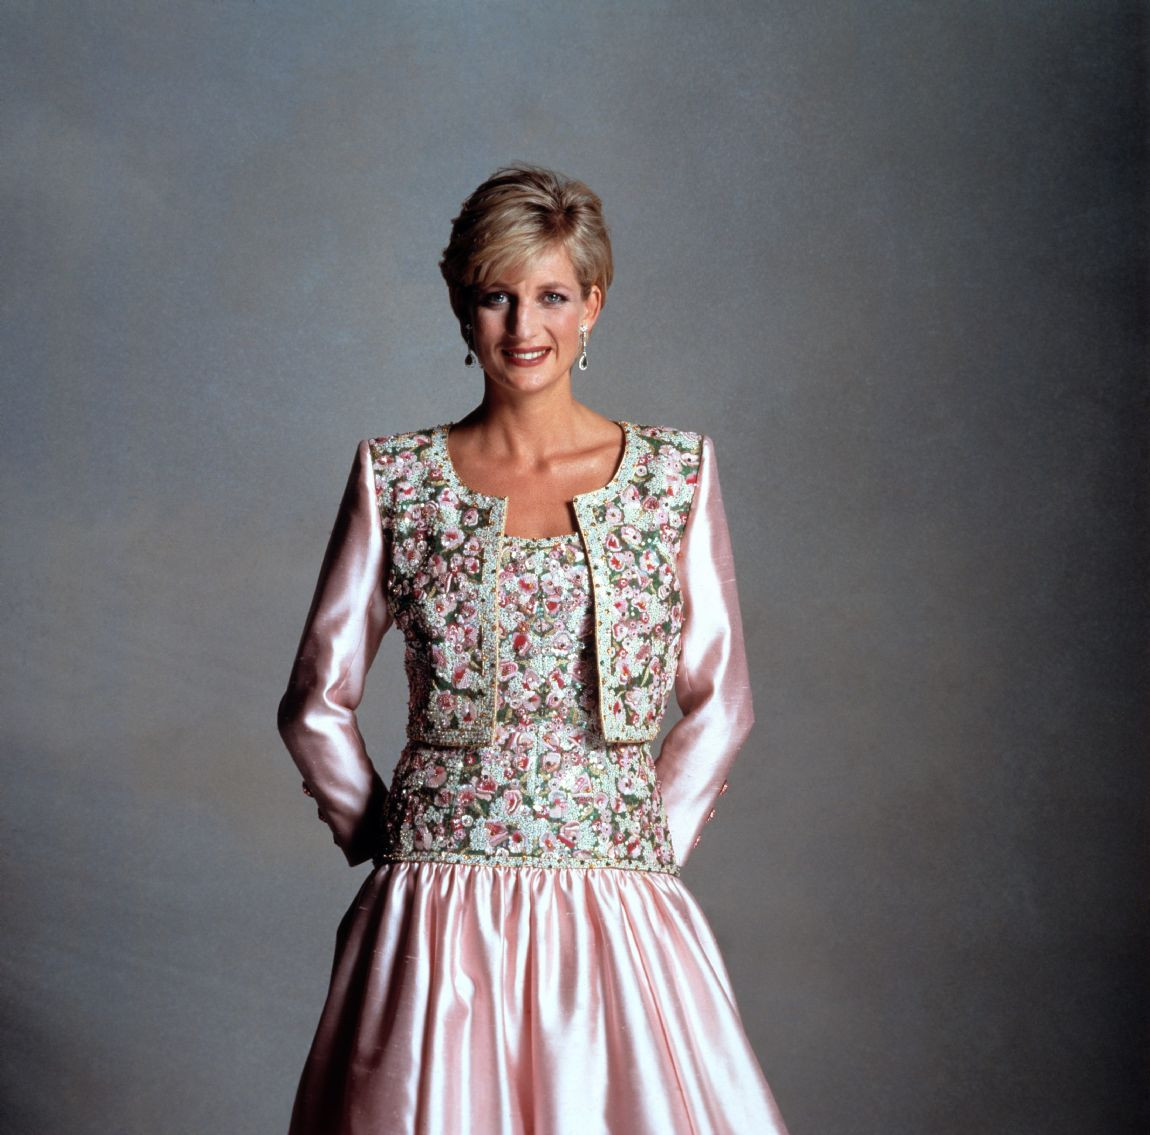 Diana Spencer photo 53 of 212 pics, wallpaper - photo #337127 - ThePlace2